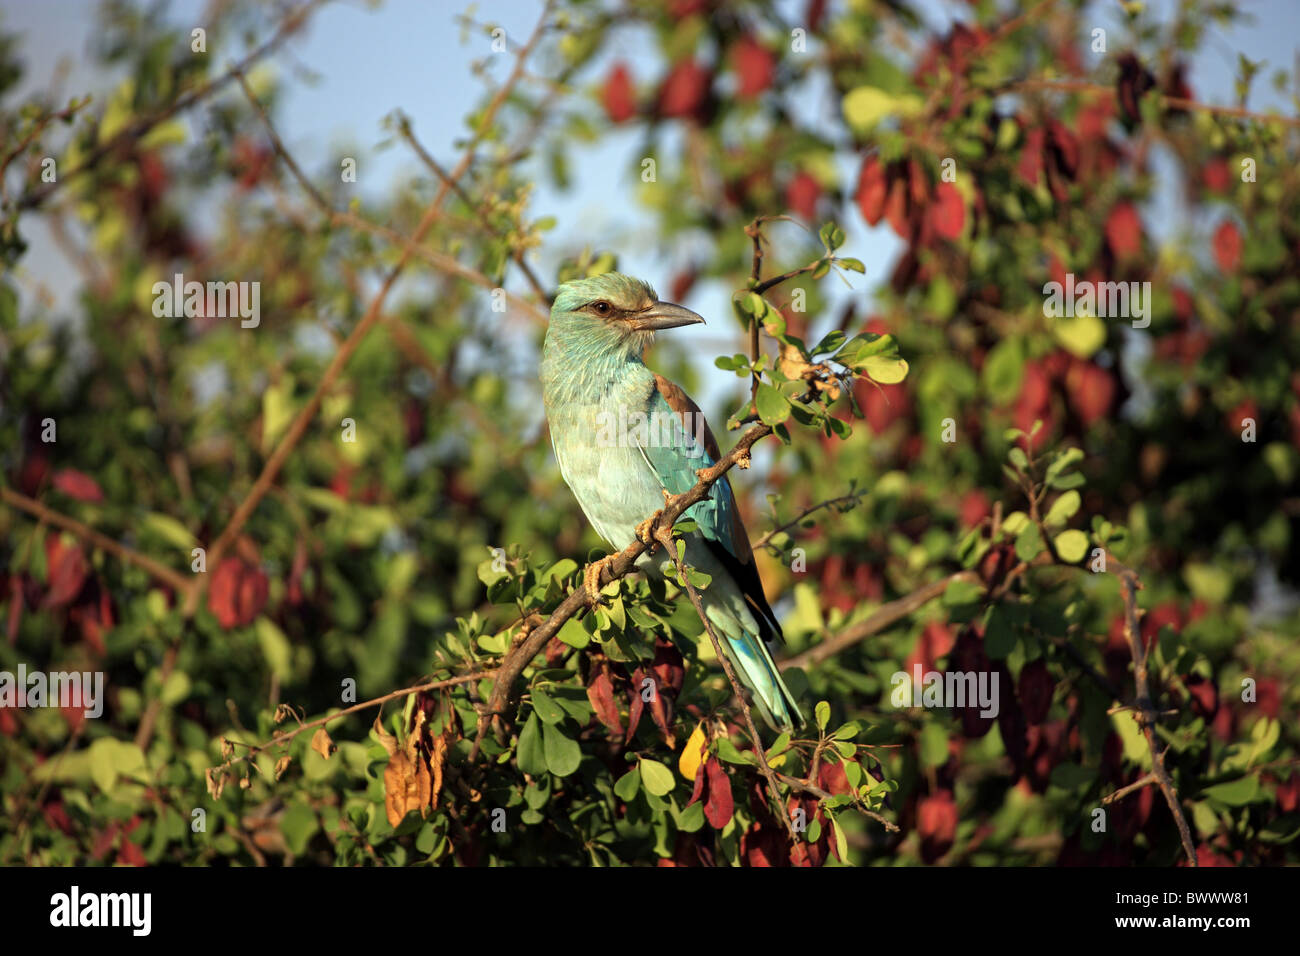 European Roller (Coracias garrulus) adult, perched on branch, Kruger N.P., South Africa Stock Photo